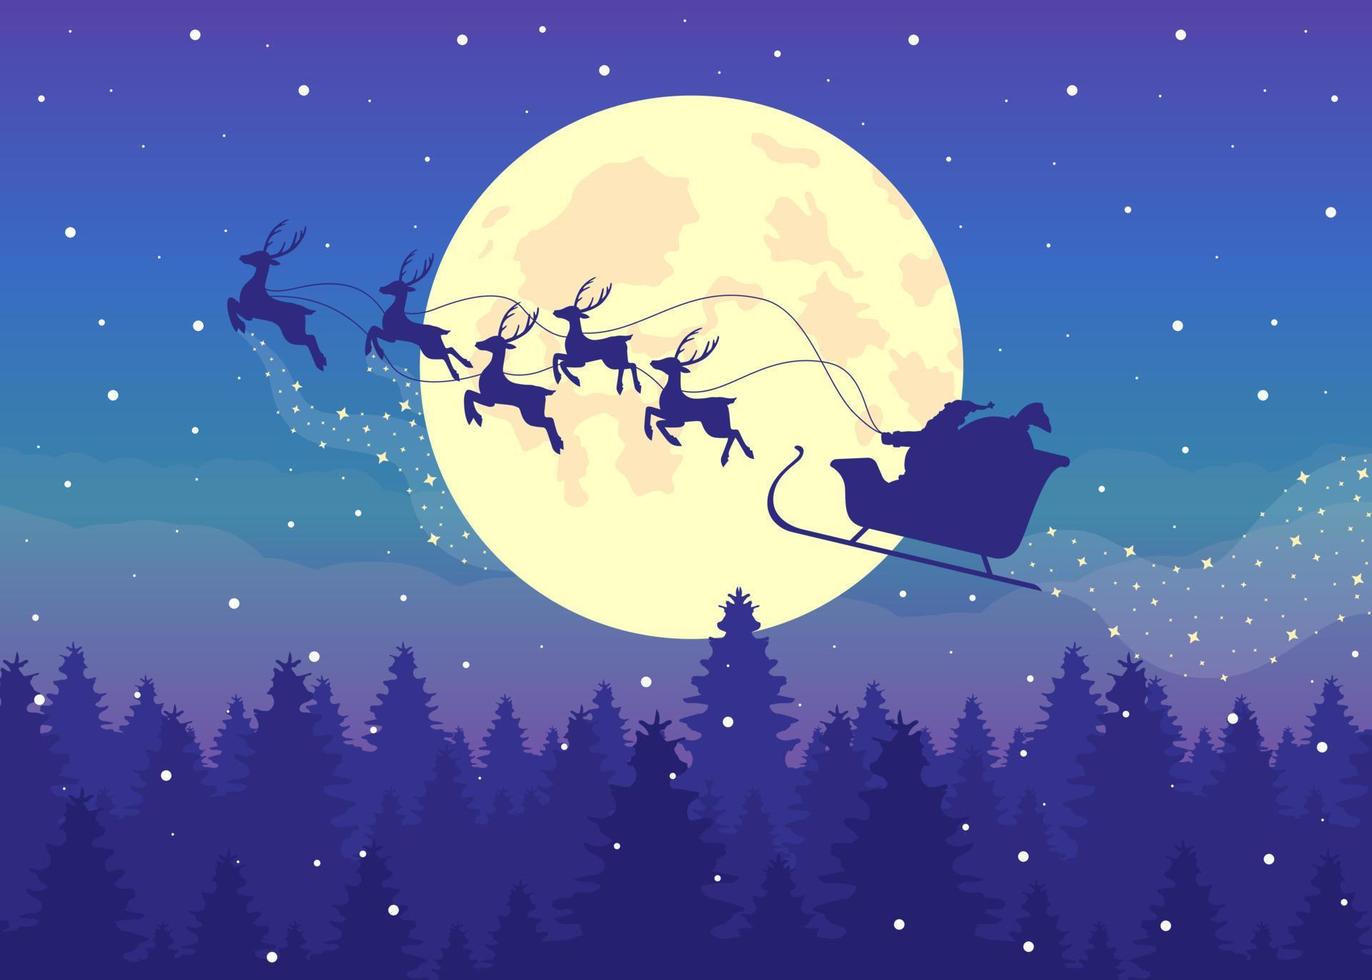 Santa sleigh with reindeers silhouette on night sky flat color vector illustration. Xmas holiday. Winter. Fully editable 2D simple cartoon characters with festive Christmas atmosphere on background